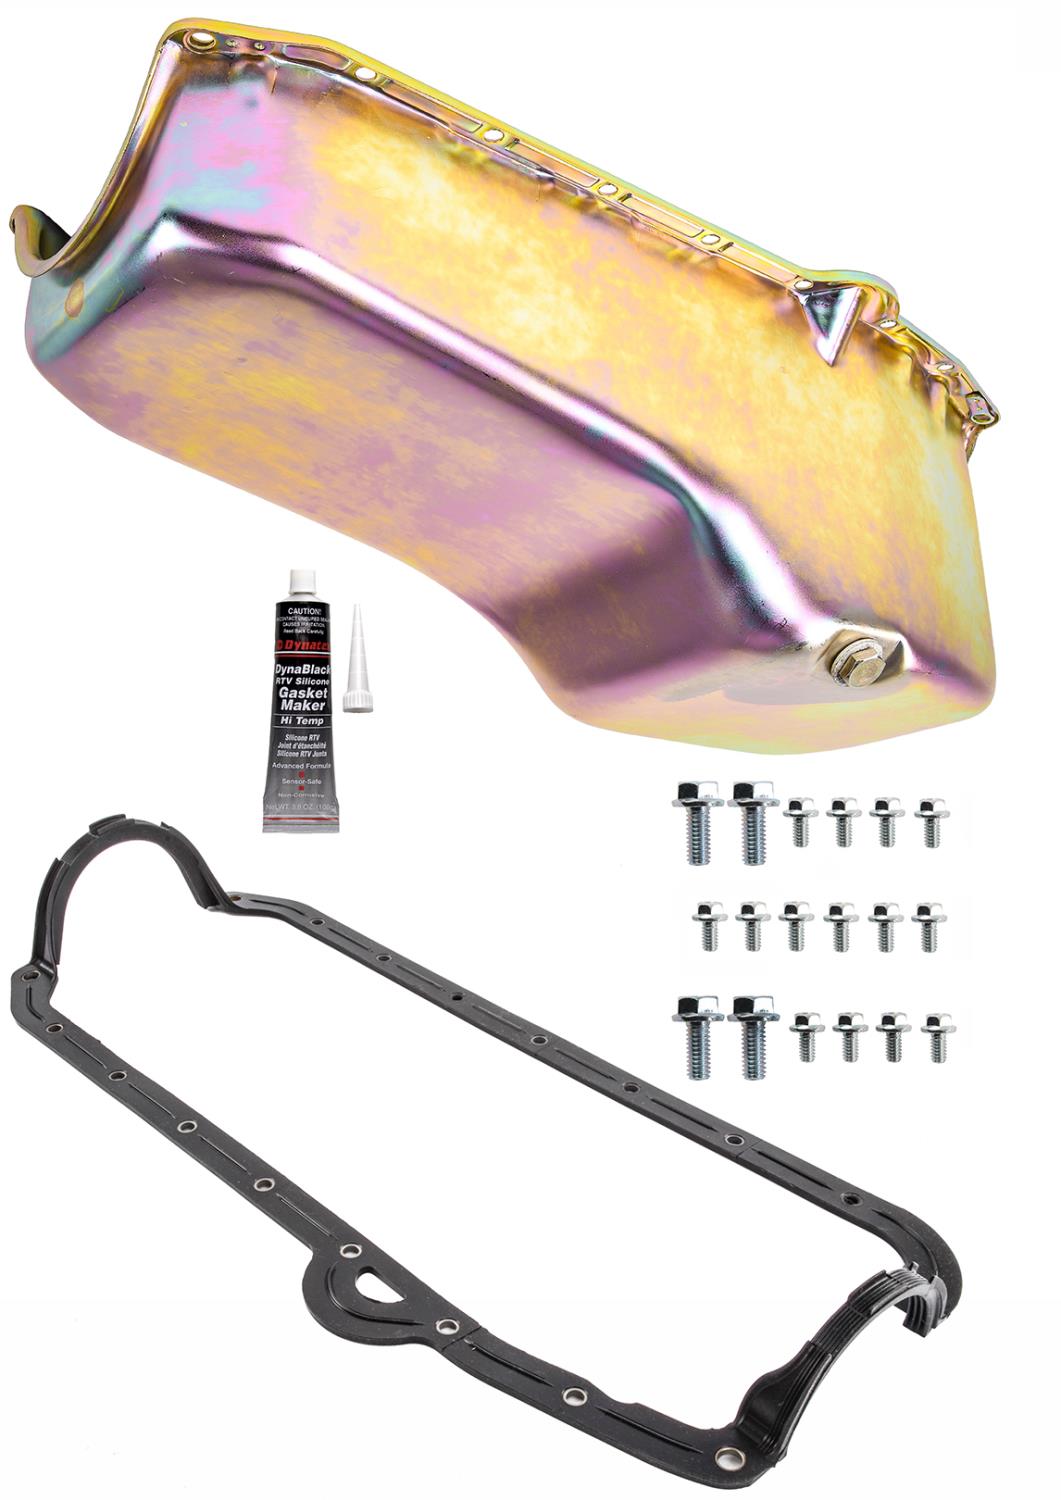 Stock-Style Replacement Oil Pan Kit for 1955-1979 Small Block Chevy w/Left Hand Dip Stick [Gold Zinc]